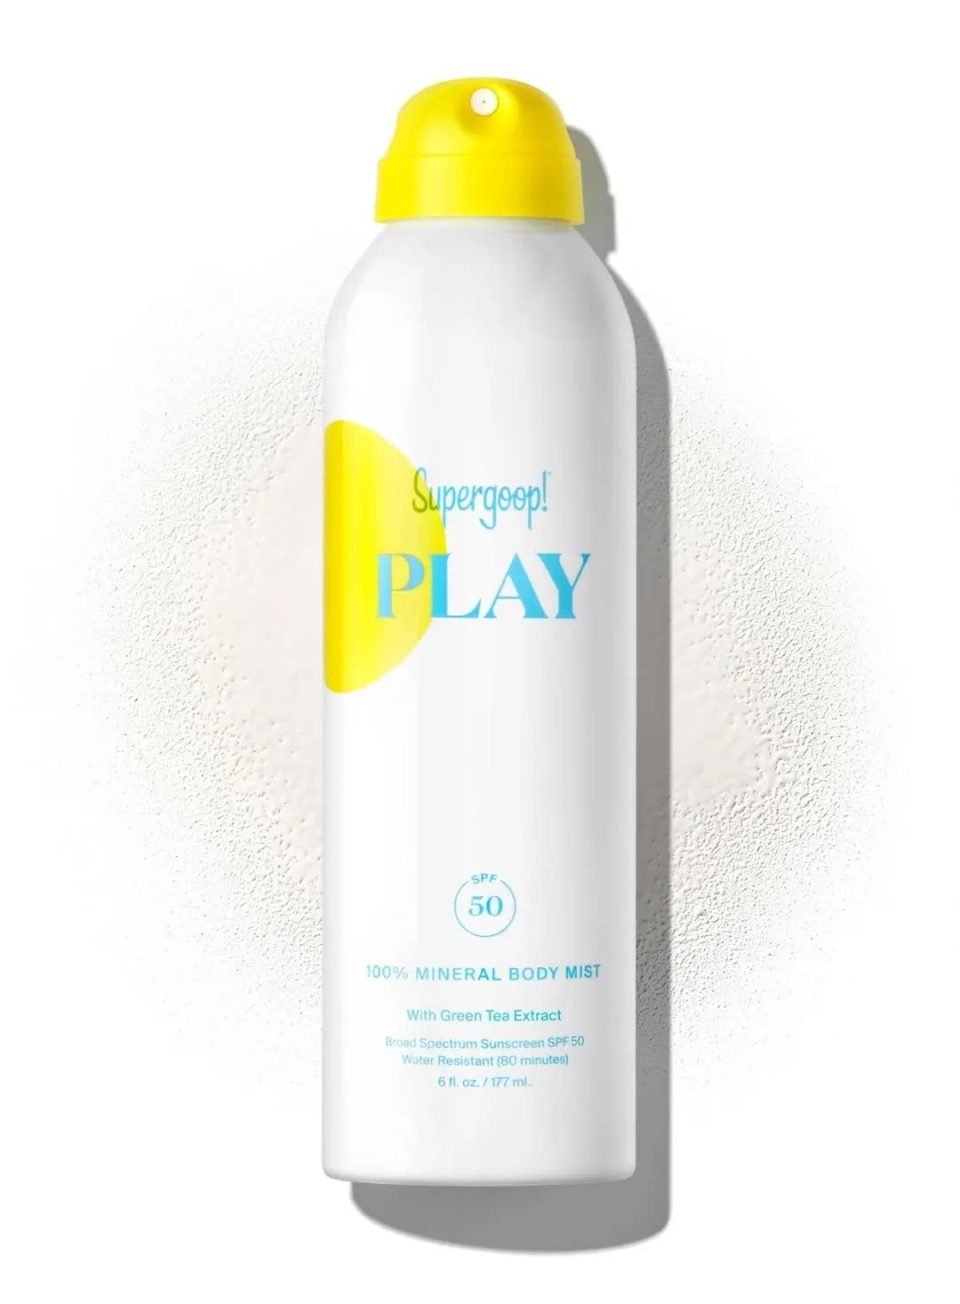 supergoop-play-100_-mineral-body-mist-spf-50-with-green-tea-extract-pack-and-texture